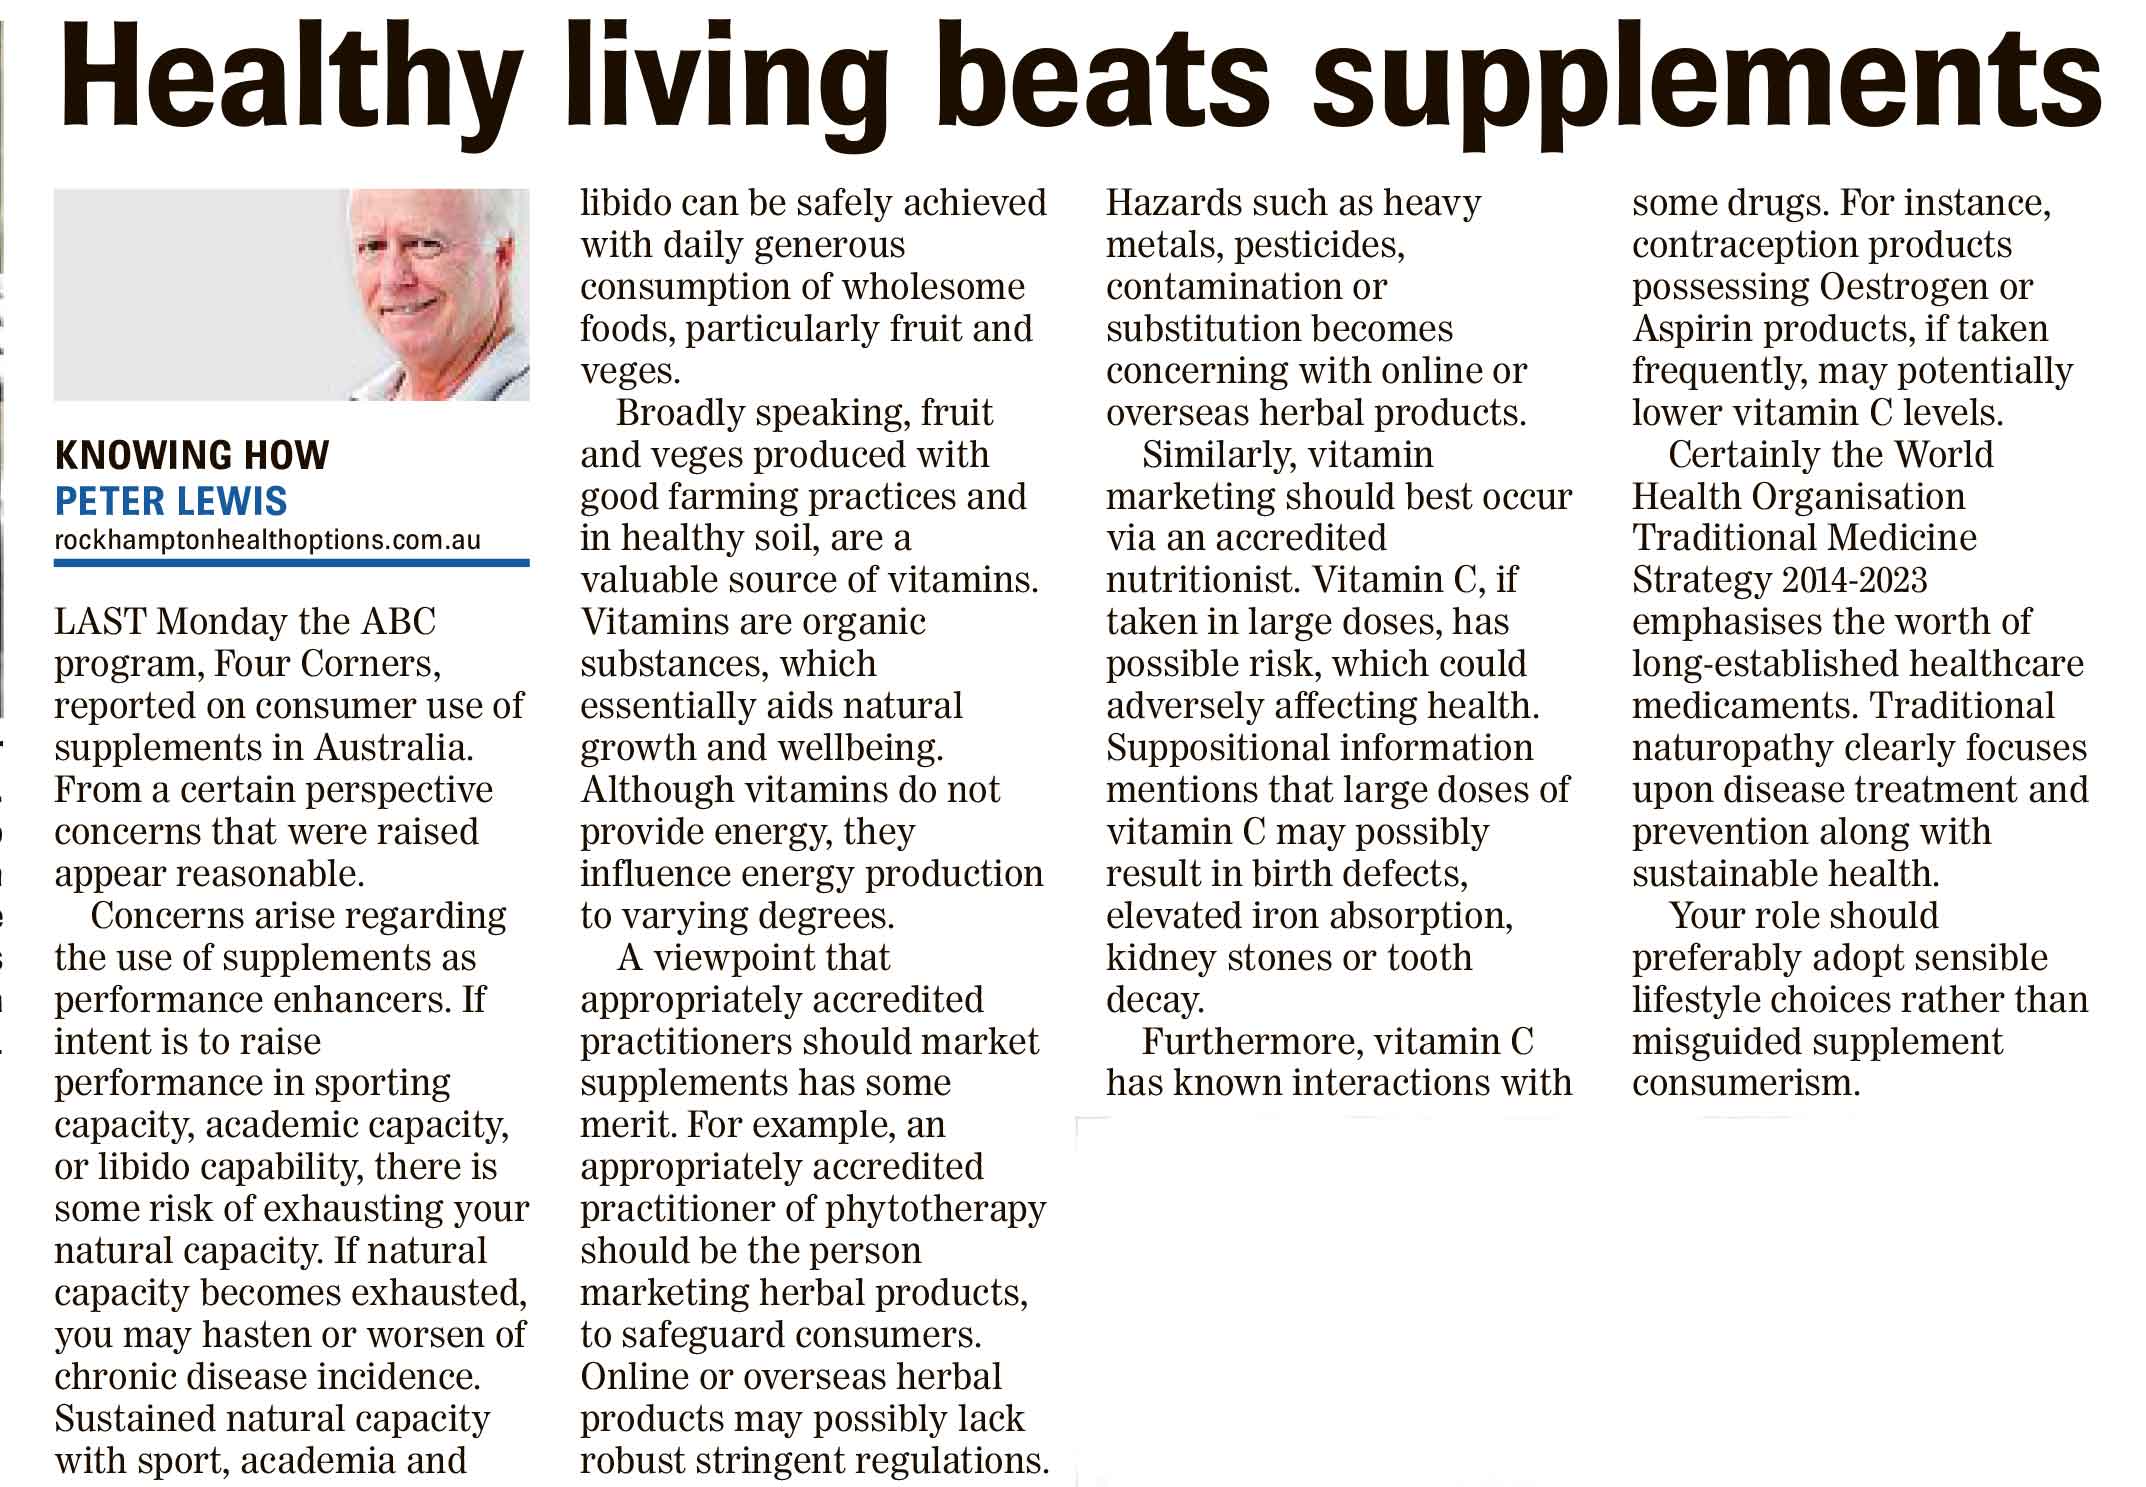 Article on healthy living beats supplements 